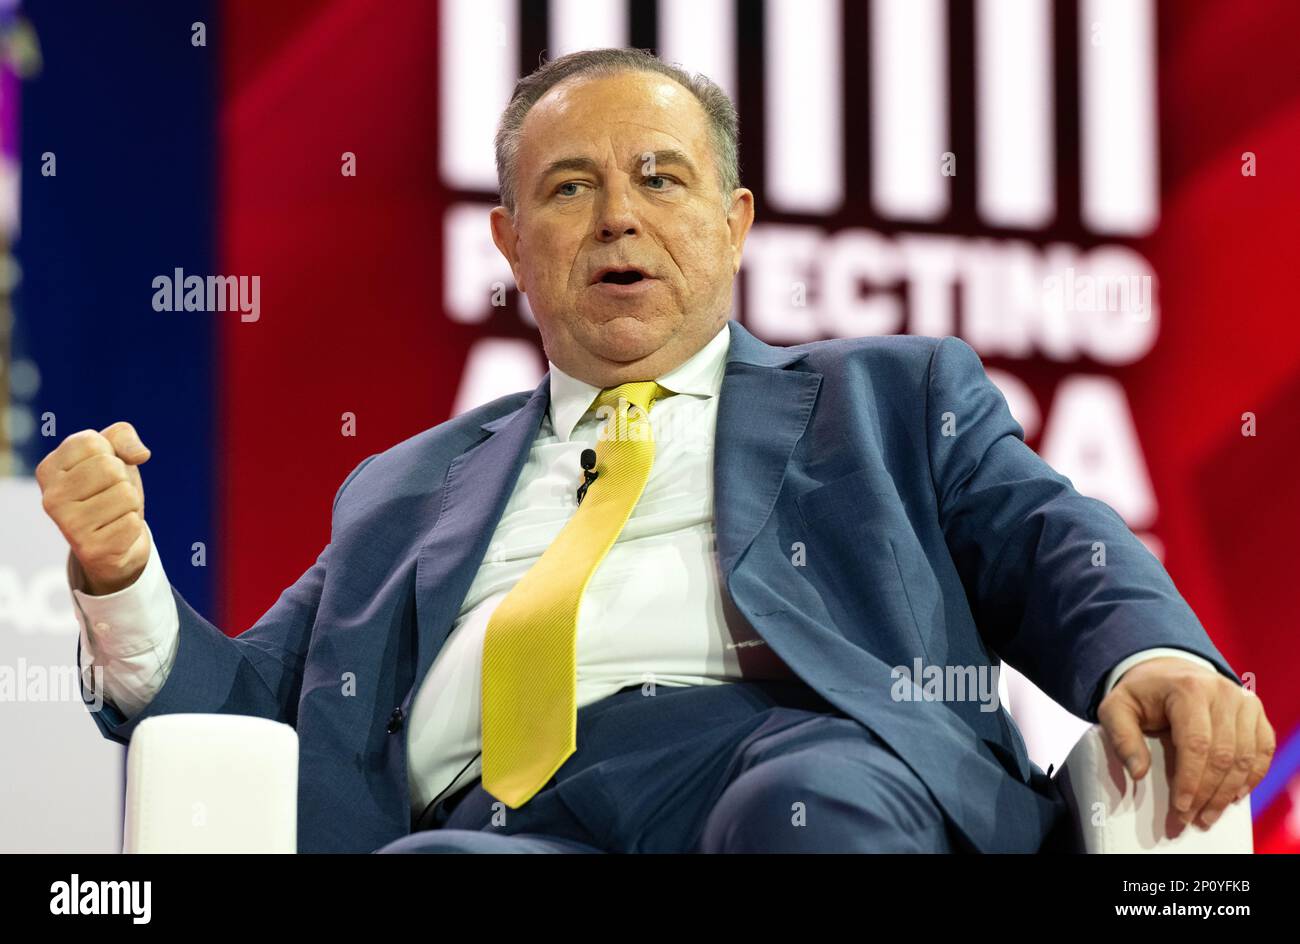 National Harbor Maryland Us March 2 2023 Chris Ruddy Ceo Newsmax At The 2023 Conservative Political Action Conference Cpac In National Harbor Maryland Us On Thursday March 2 2023 Credit Ron Sachs Cnpsipa Usa 2P0YFKB 